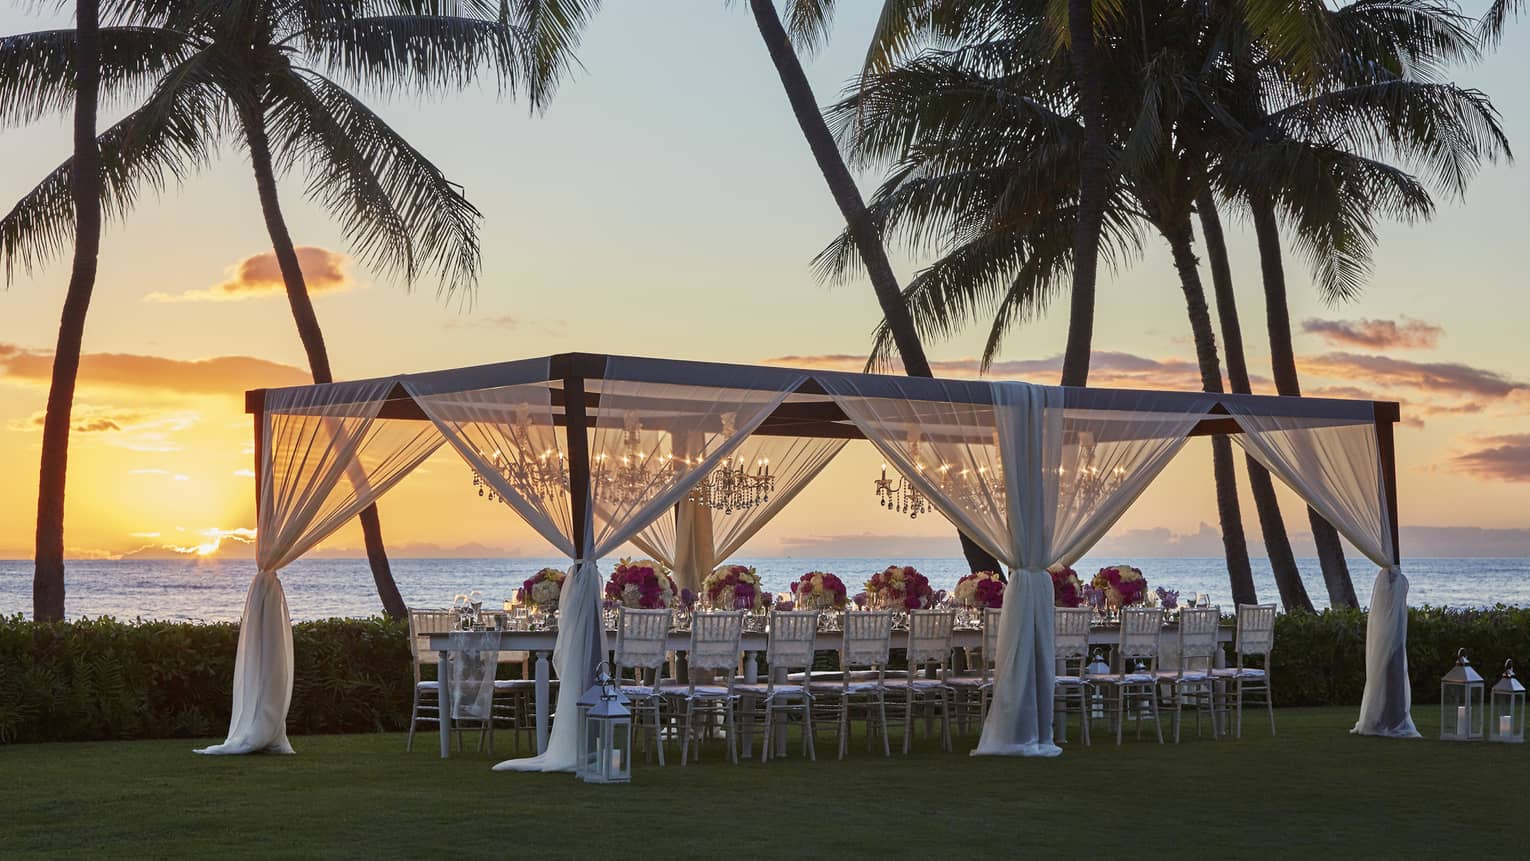 Pergola with sheer white curtains over wedding dining table on lawn by palm trees, ocean at sunset